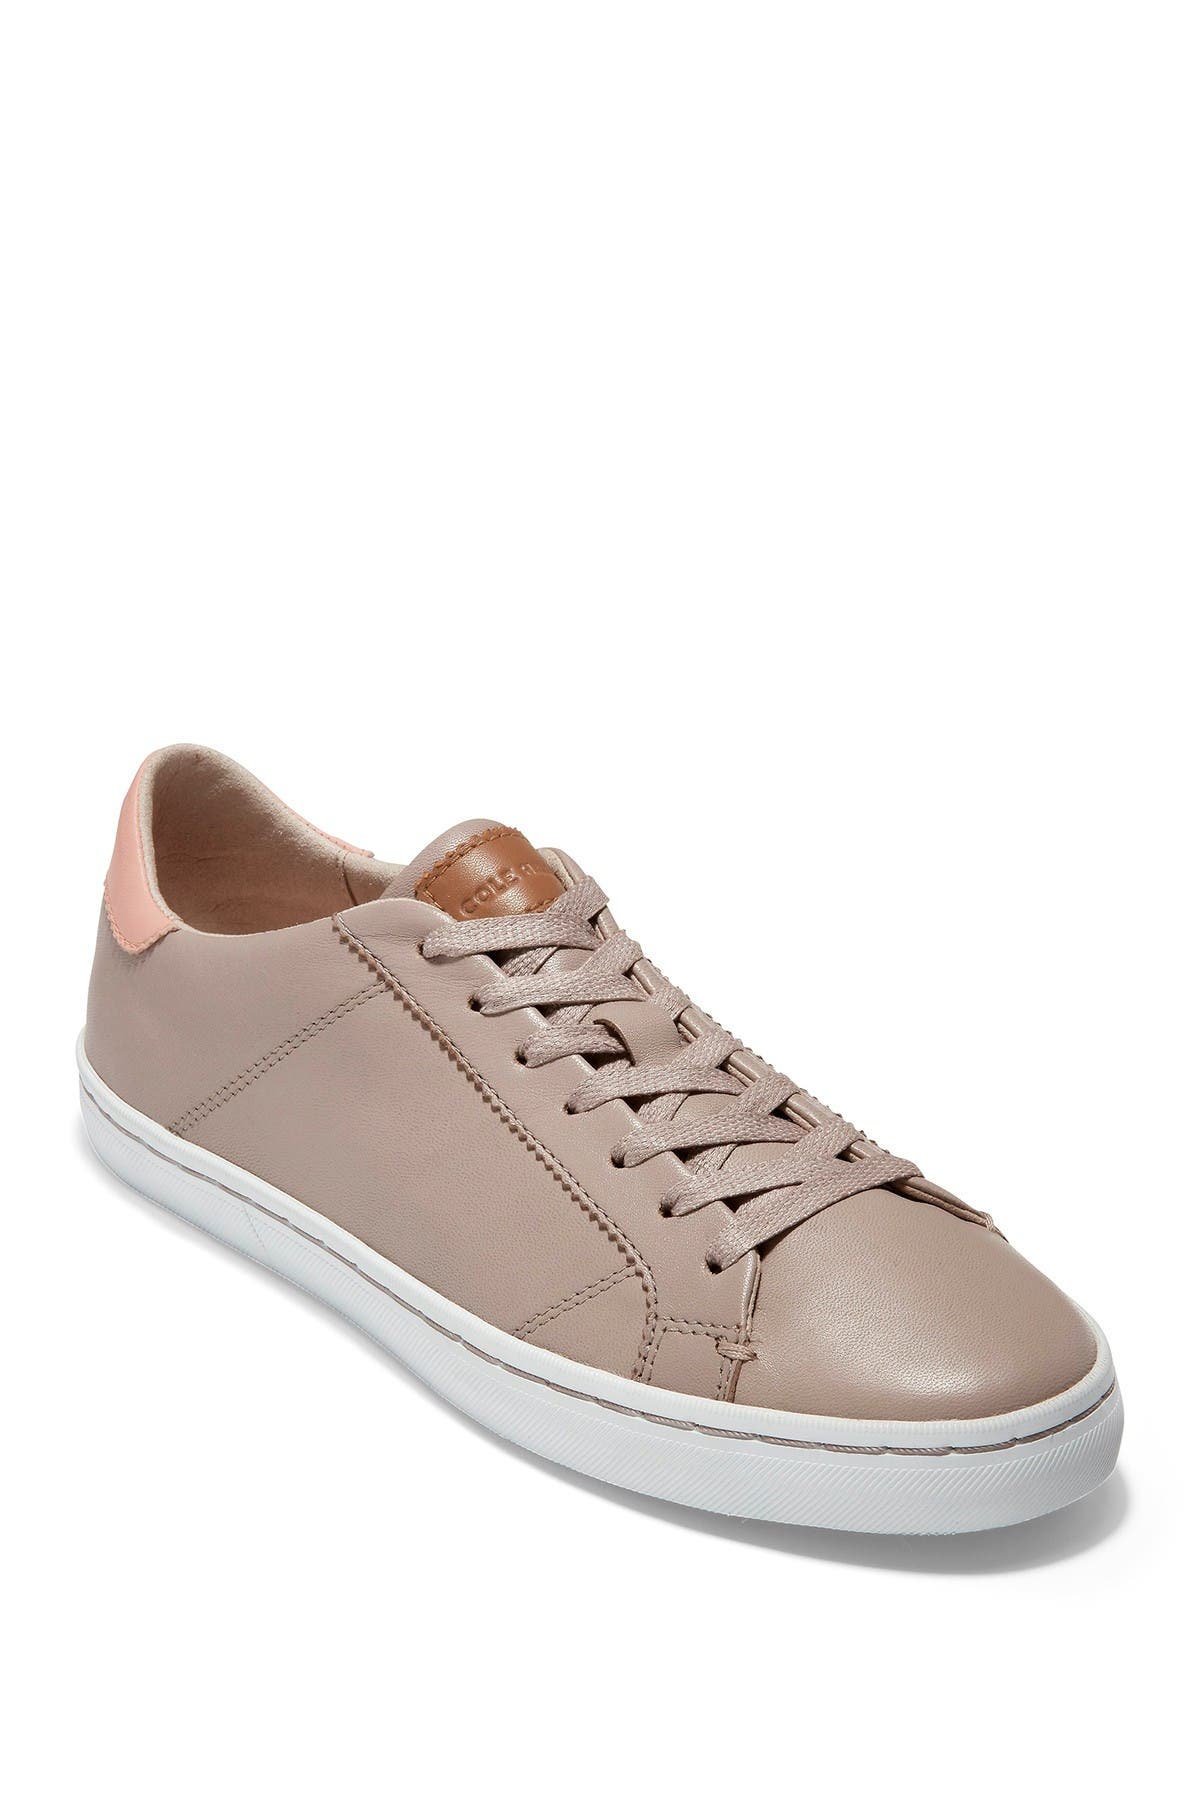 nordstrom womens cole haan shoes